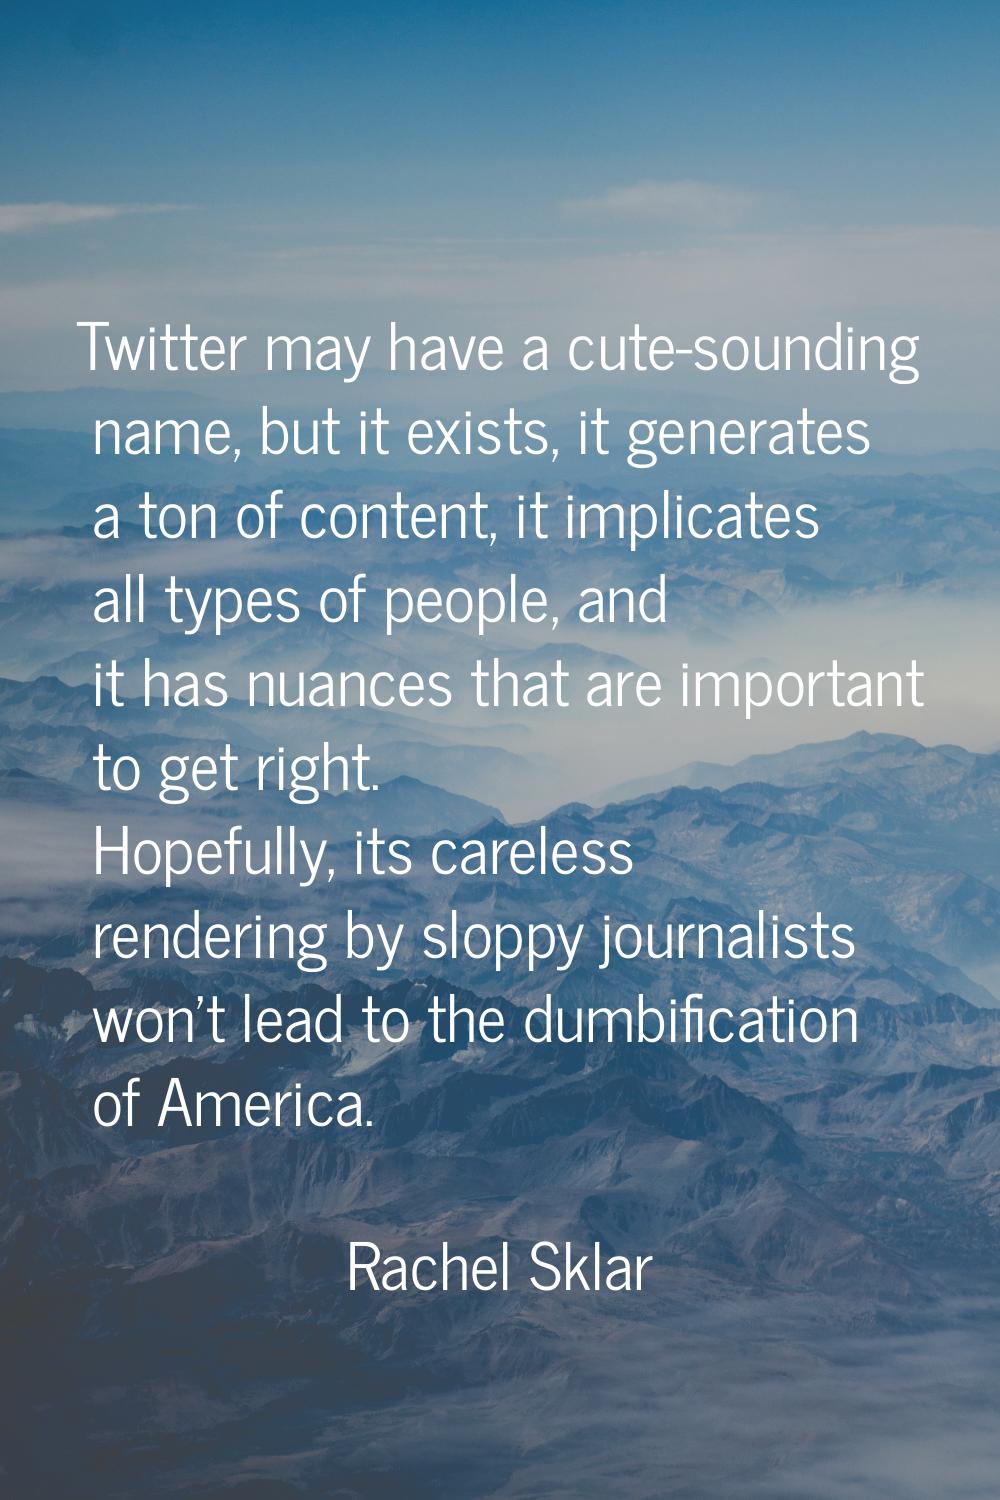 Twitter may have a cute-sounding name, but it exists, it generates a ton of content, it implicates 